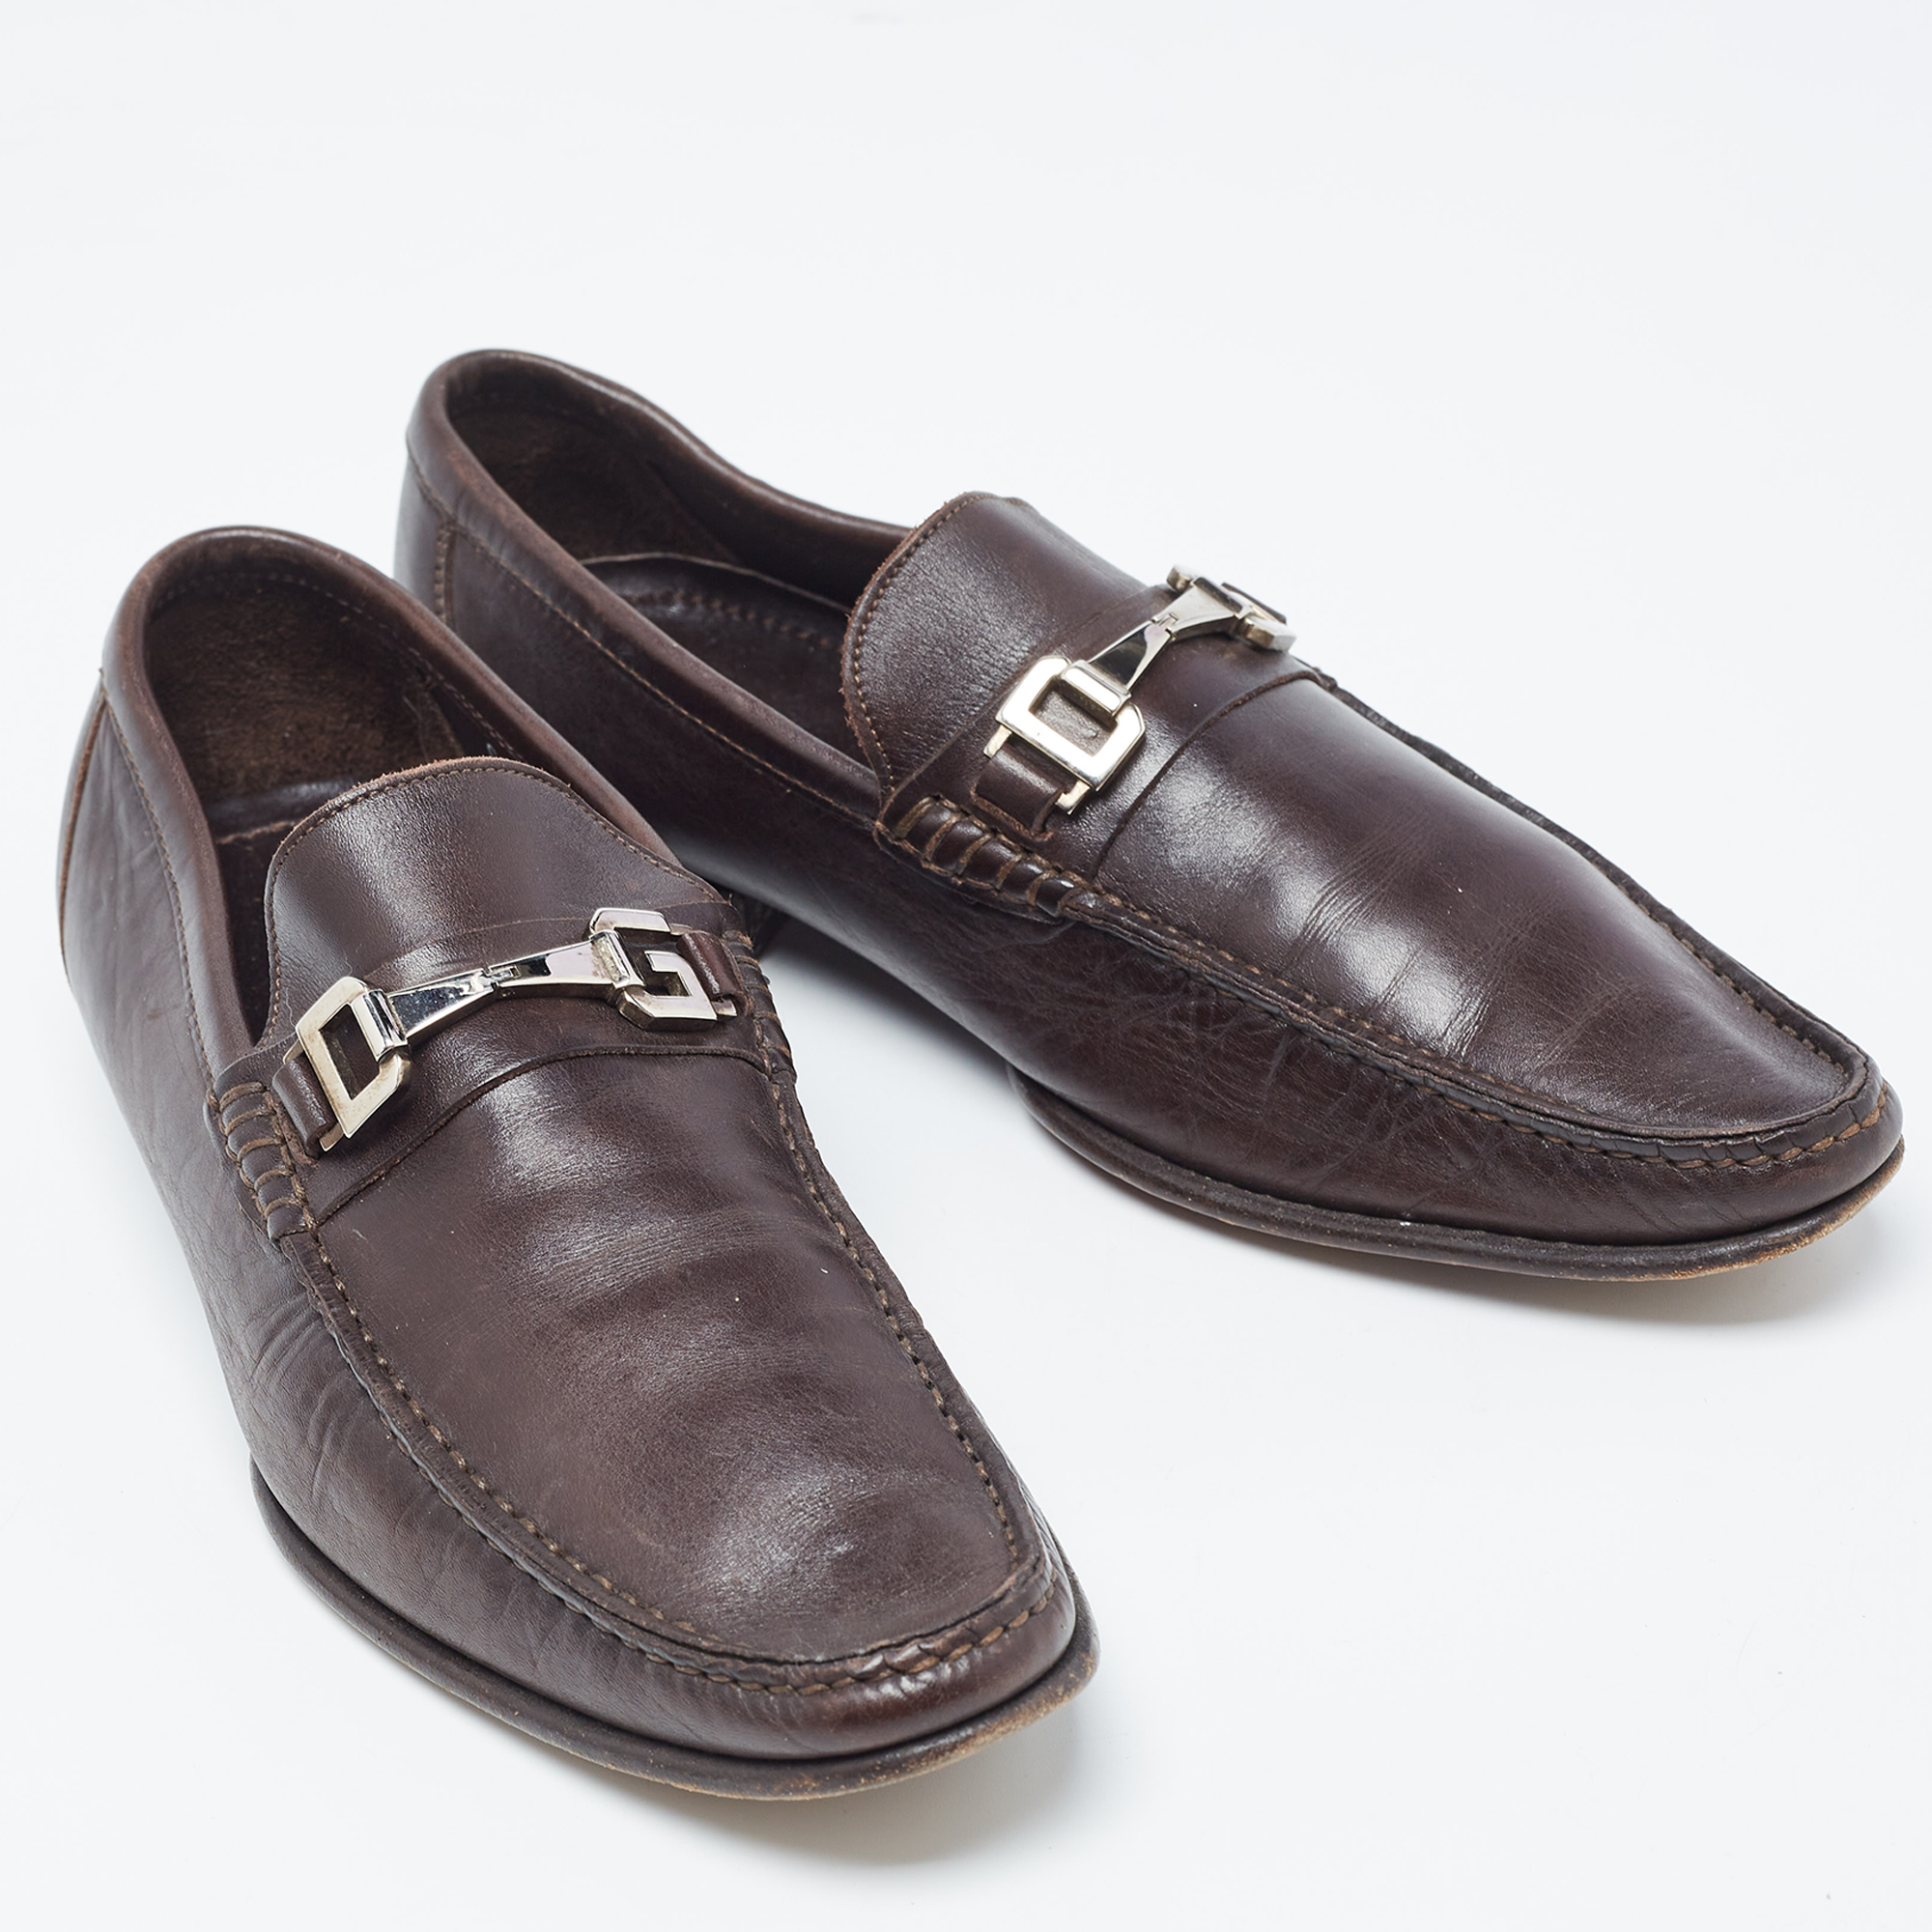 Dolce & Gabbana Brown Leather Penny Loafers Size 39.5